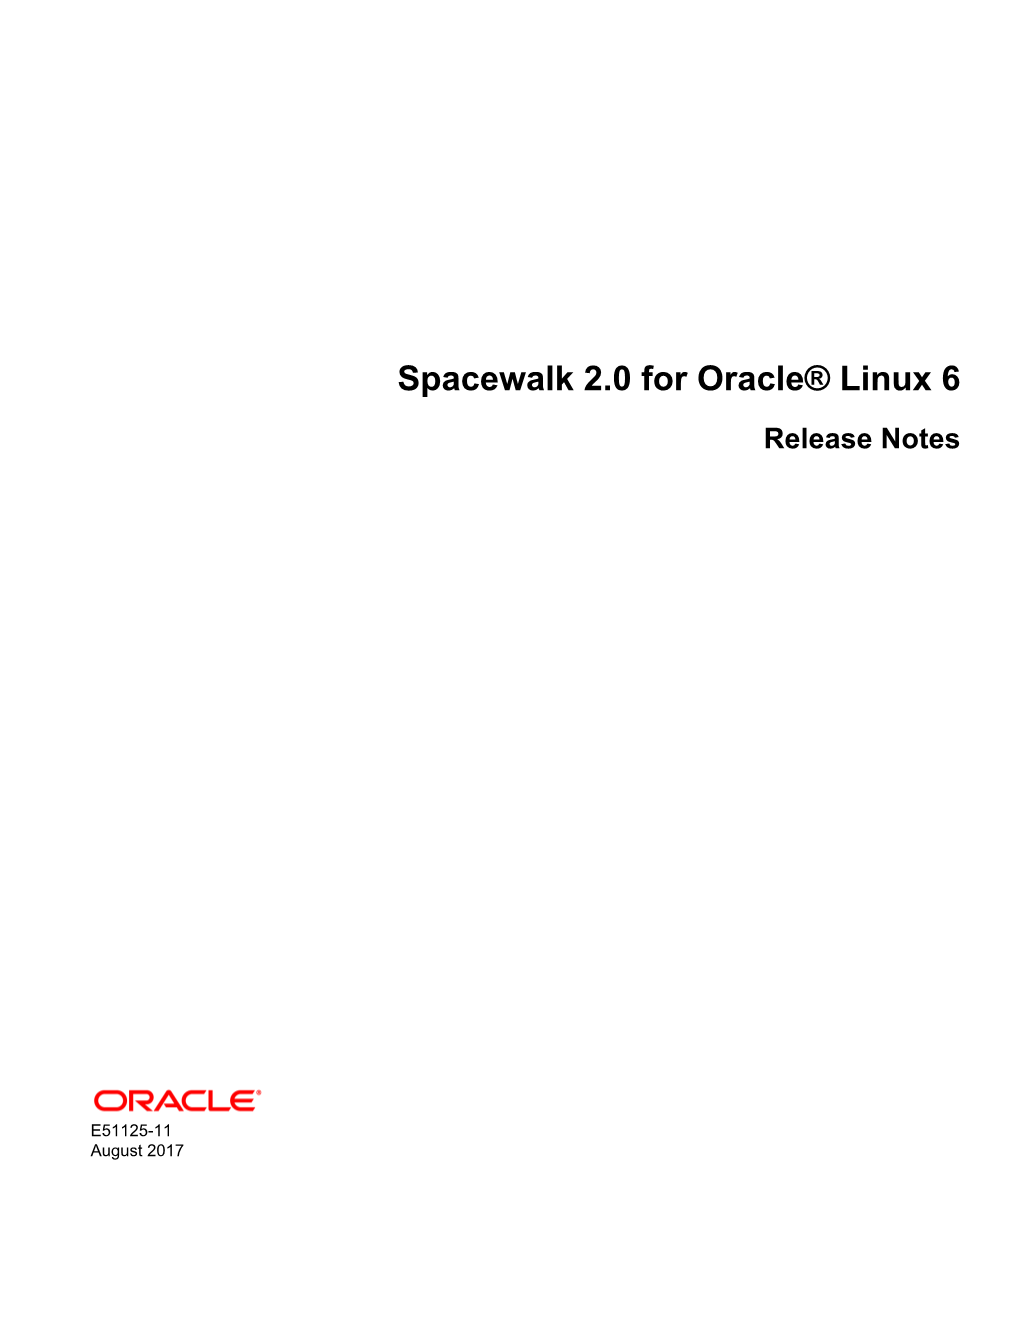 Spacewalk 2.0 for Oracle® Linux 6 Release Notes